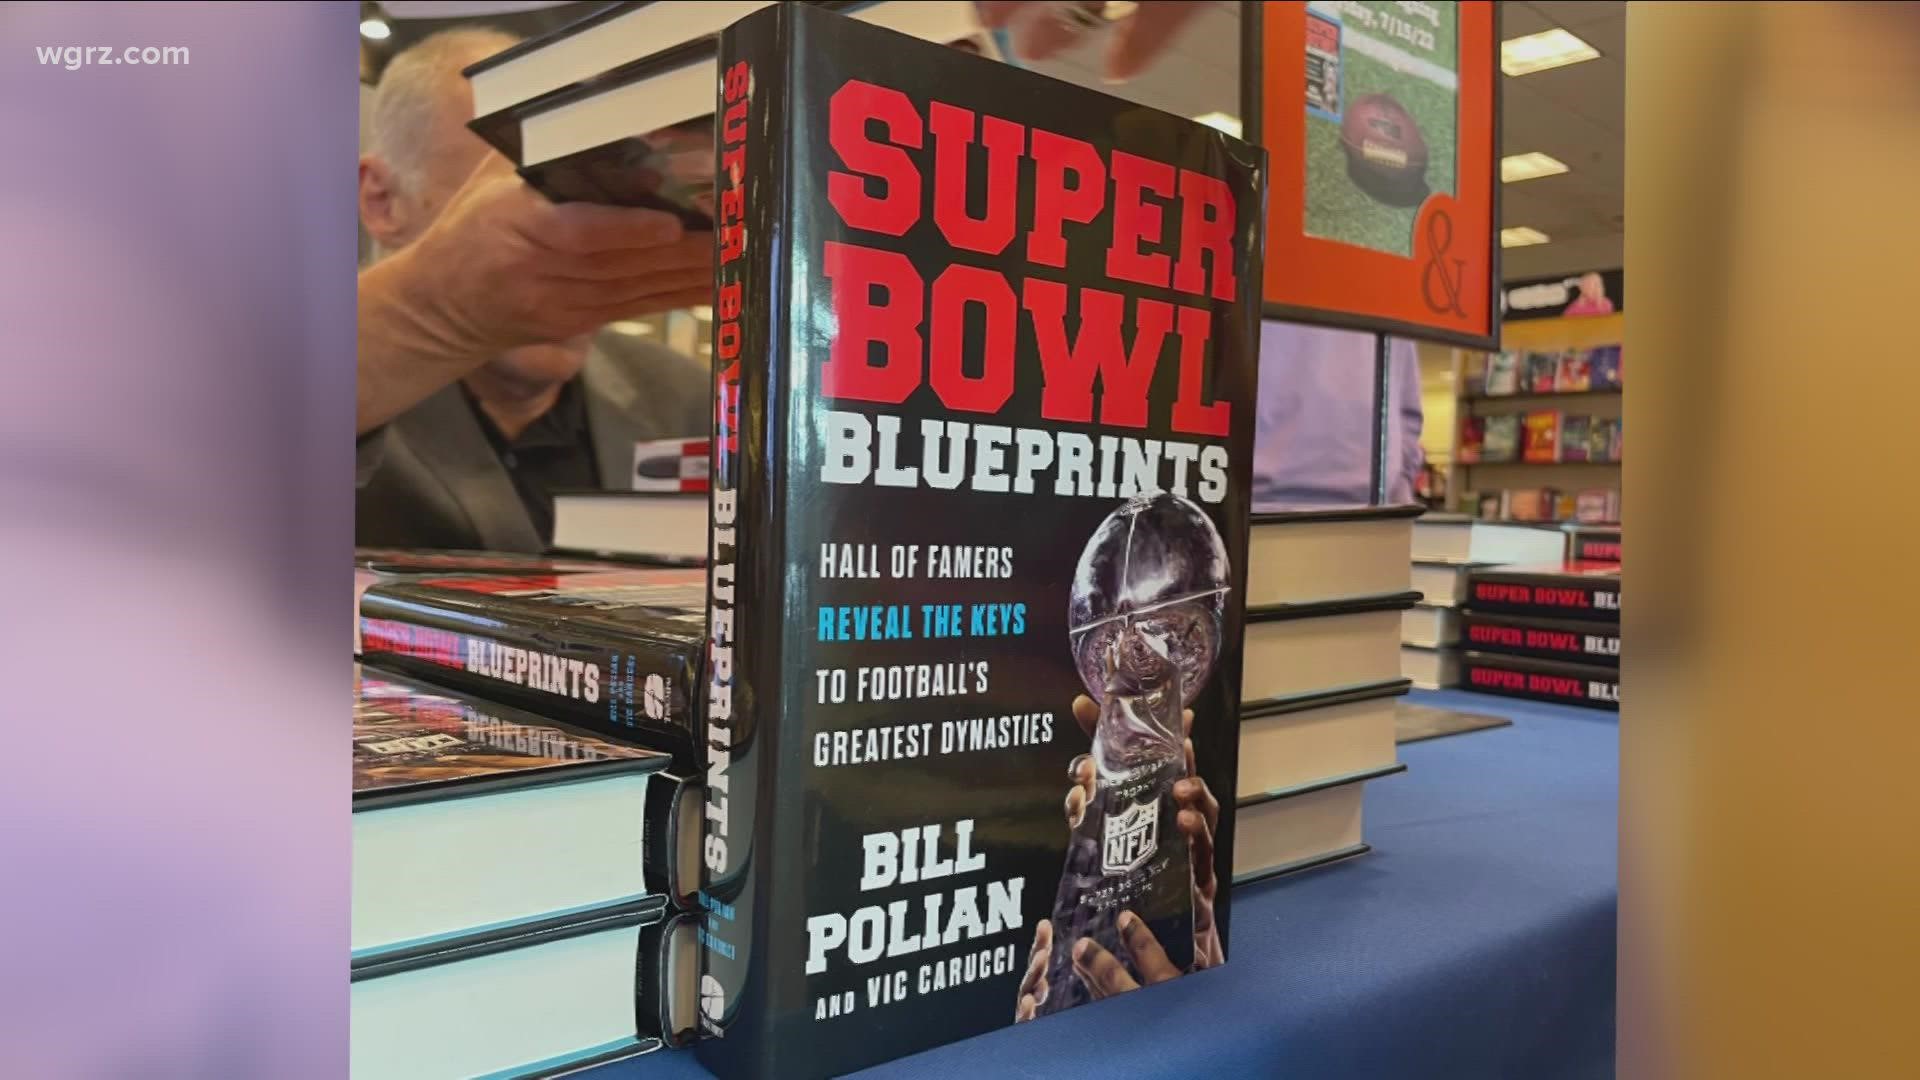 Bill Polian was in town on Friday night to sign copies of his new book "Super Bowl Blueprints."